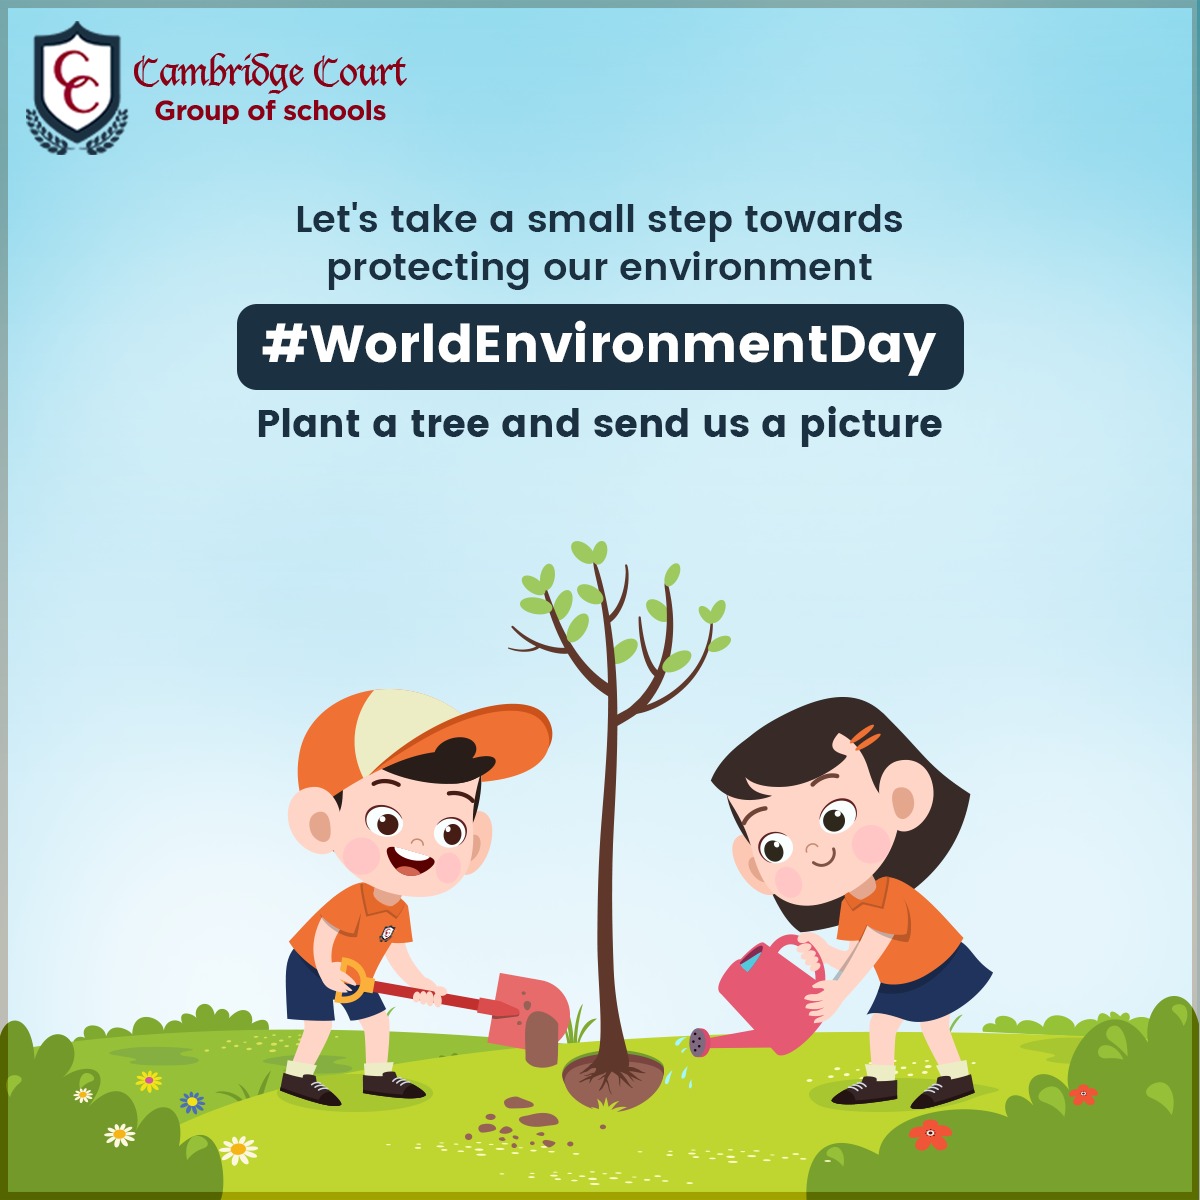 #WorldEnvironmentDay
.
Let's take a small step towards protecting our environment. 🌍

Plant a tree and send us a picture in the comment section or DM us.🌱
.
#CleanJaipur #EnvironmentDay2020 #TimeforNature #SummerCamp #VirtualClasses #OnlineCamp #VirtualCamp #OnlineActivities